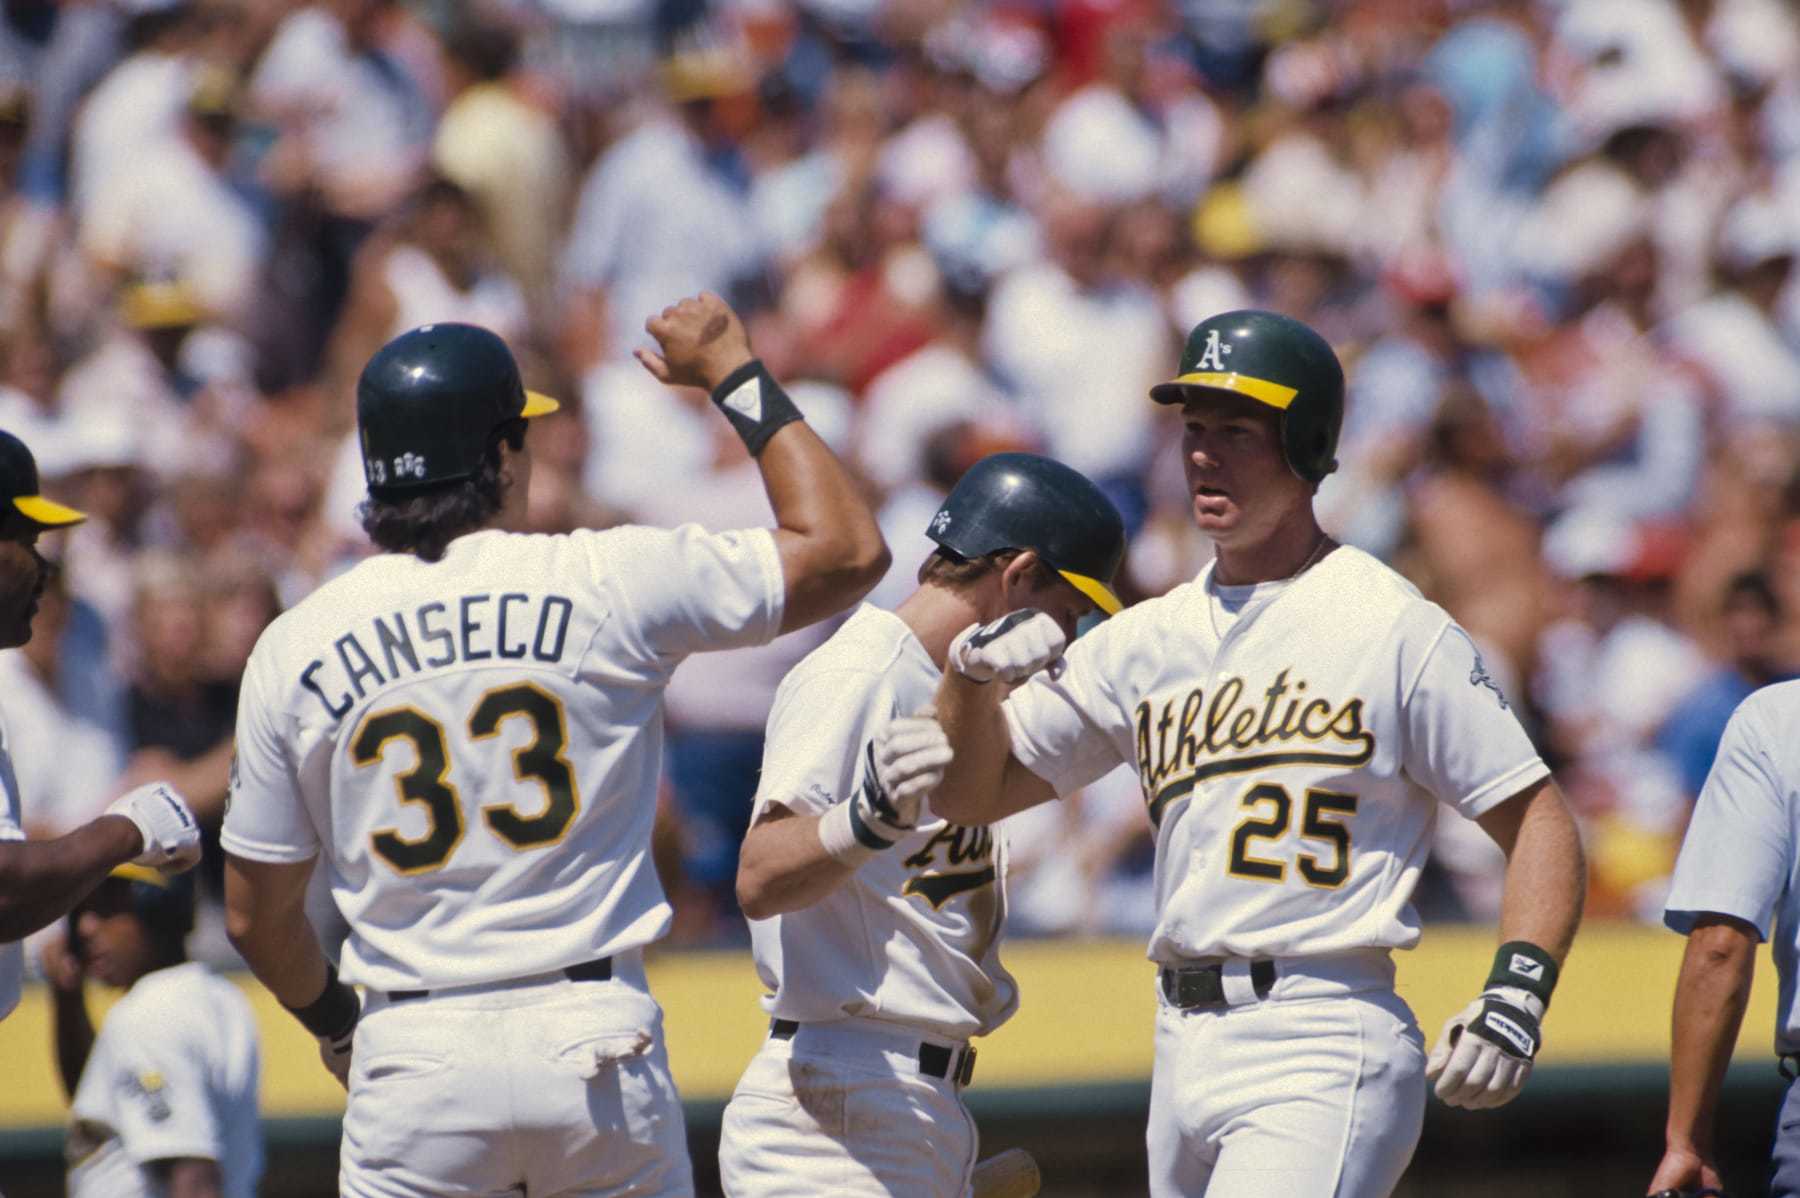 Throwback Thursday: 10 Best Power-Hitting Teammates of the 1990s